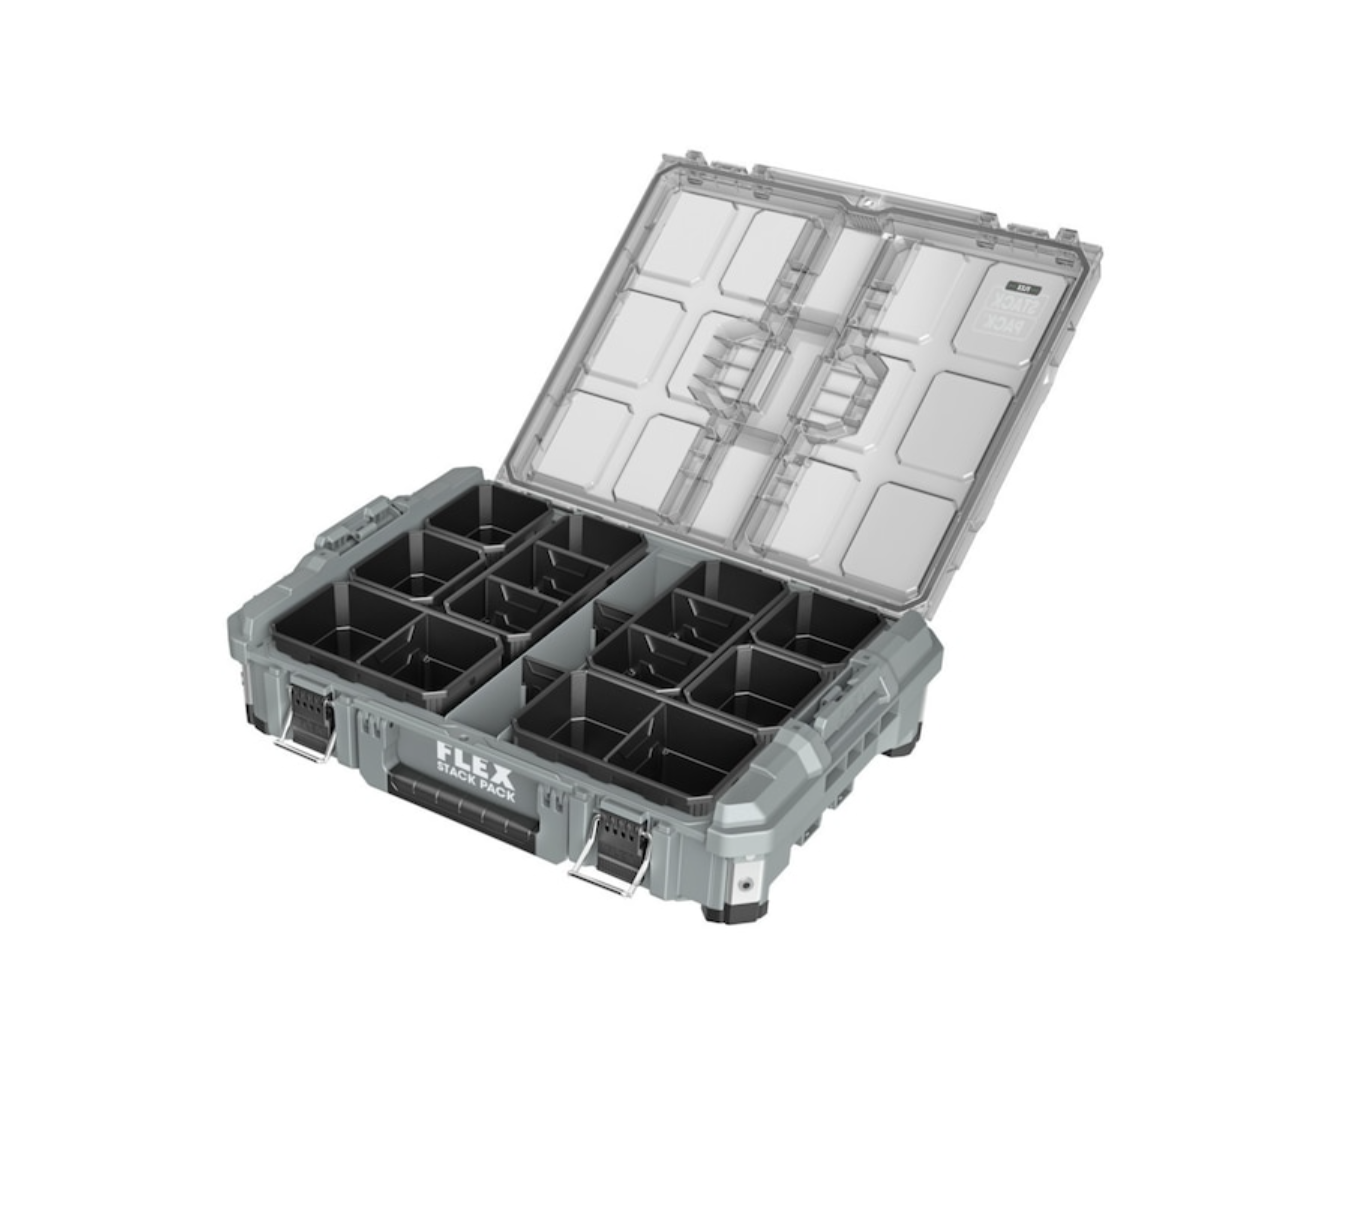 FLEX STACK PACK Organizer Box 22-in Gray Metal Lockable Tool Box in the  Portable Tool Boxes department at